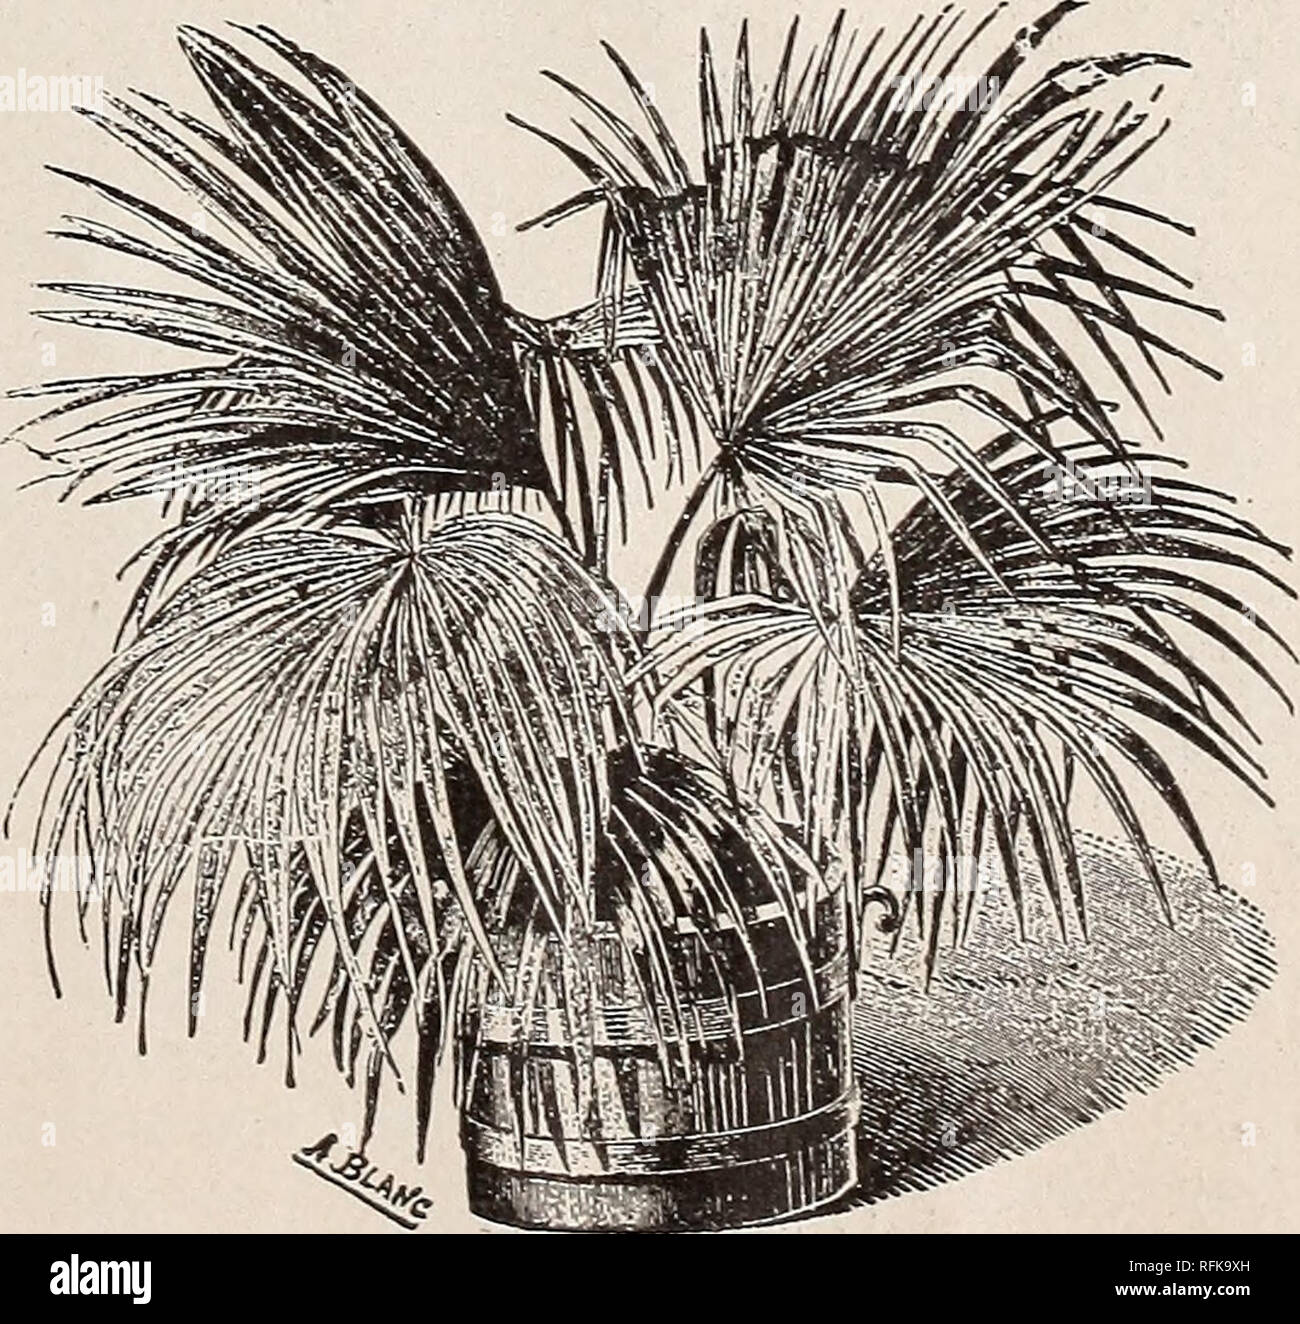 . Bancroft's beautiful flowers : fall 1897. Nursery stock Iowa Cedar Falls Catalogs; Flowers Seeds Catalogs; Vegetables Seeds Catalogs; Bulbs (Plants) Catalogs; Plants, Ornamental Catalogs. CYCAS REVOLTJTA. Cycas Revoluta. {Sago Palm.) The stems of this variety are similar in shape to a pineapple ; leaves grow in whorls at top. $1.00, $2.00, $3.00 and $5.00 each. Extra large specimens $15.00 each. Areca Lutescens. A most elegant Palm. One of the best for general decorative purposes, easily grown, useful in every stage of its growth, fine color, graceful habit, stems golden yellow, tall grower. Stock Photo